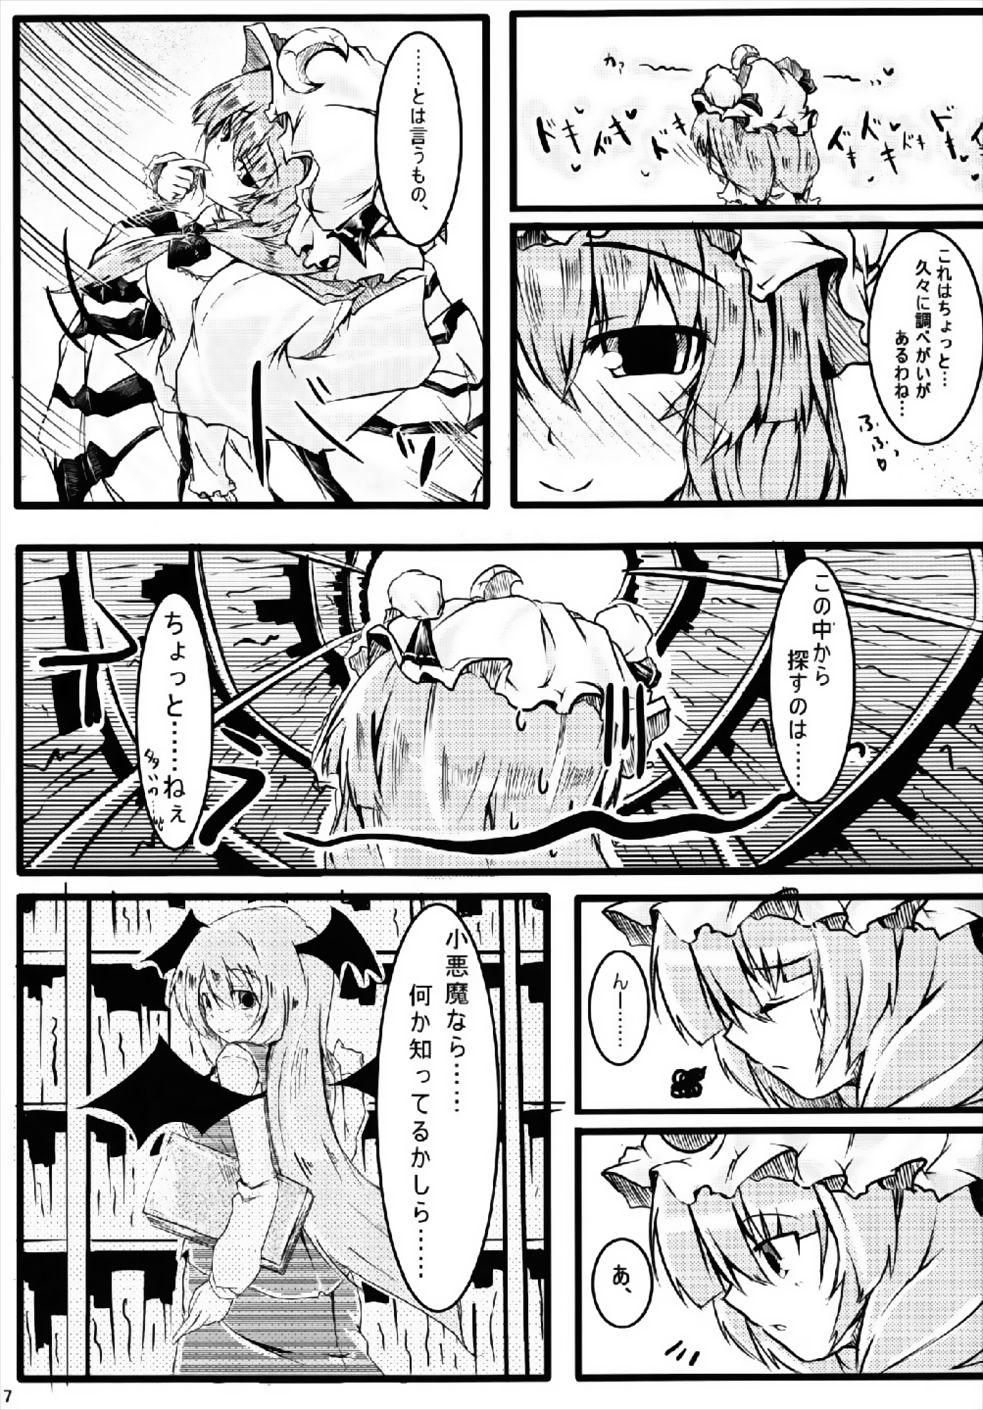 Mulata RemiFlaPatche! - Touhou project Pegging - Page 6